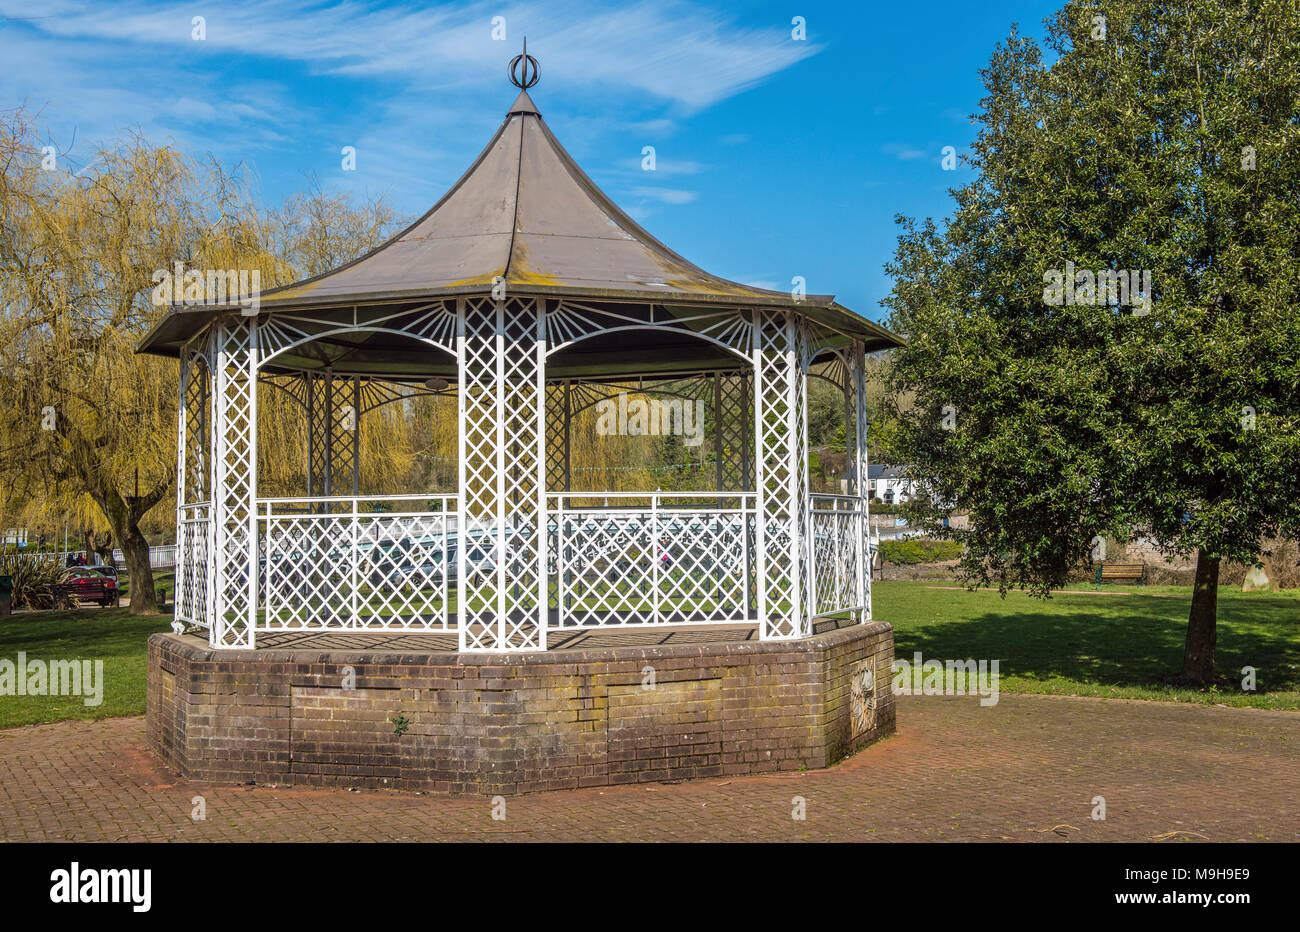 Chepstow Bandstand Monmouthshire, South East Wales Foto Stock